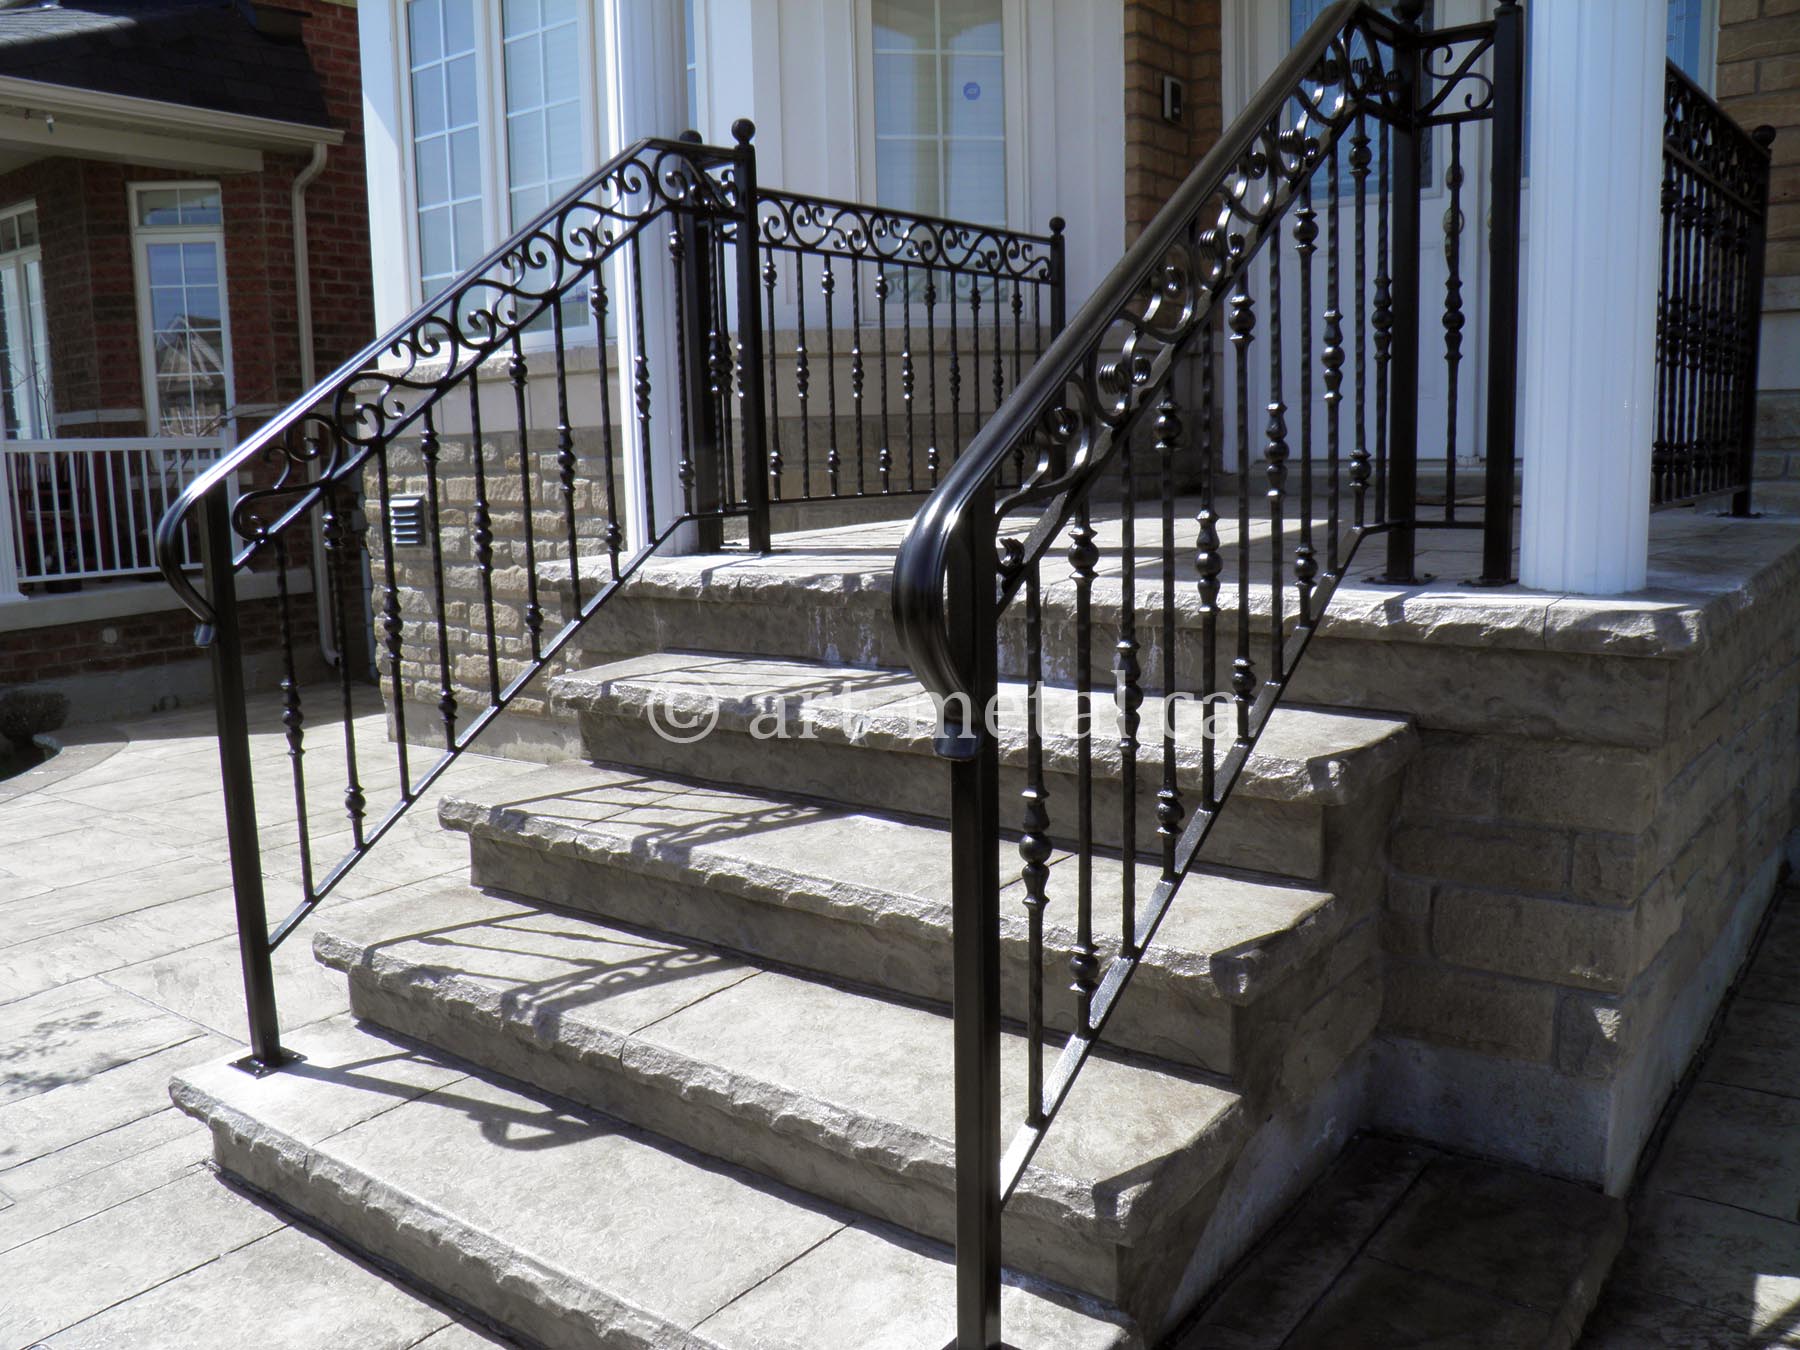 Iron Stair Railings Outdoor : Amazing Railings For Outdoor Stairs #8 Outdoor Wrought ... / Great savings & free delivery / collection on many items.